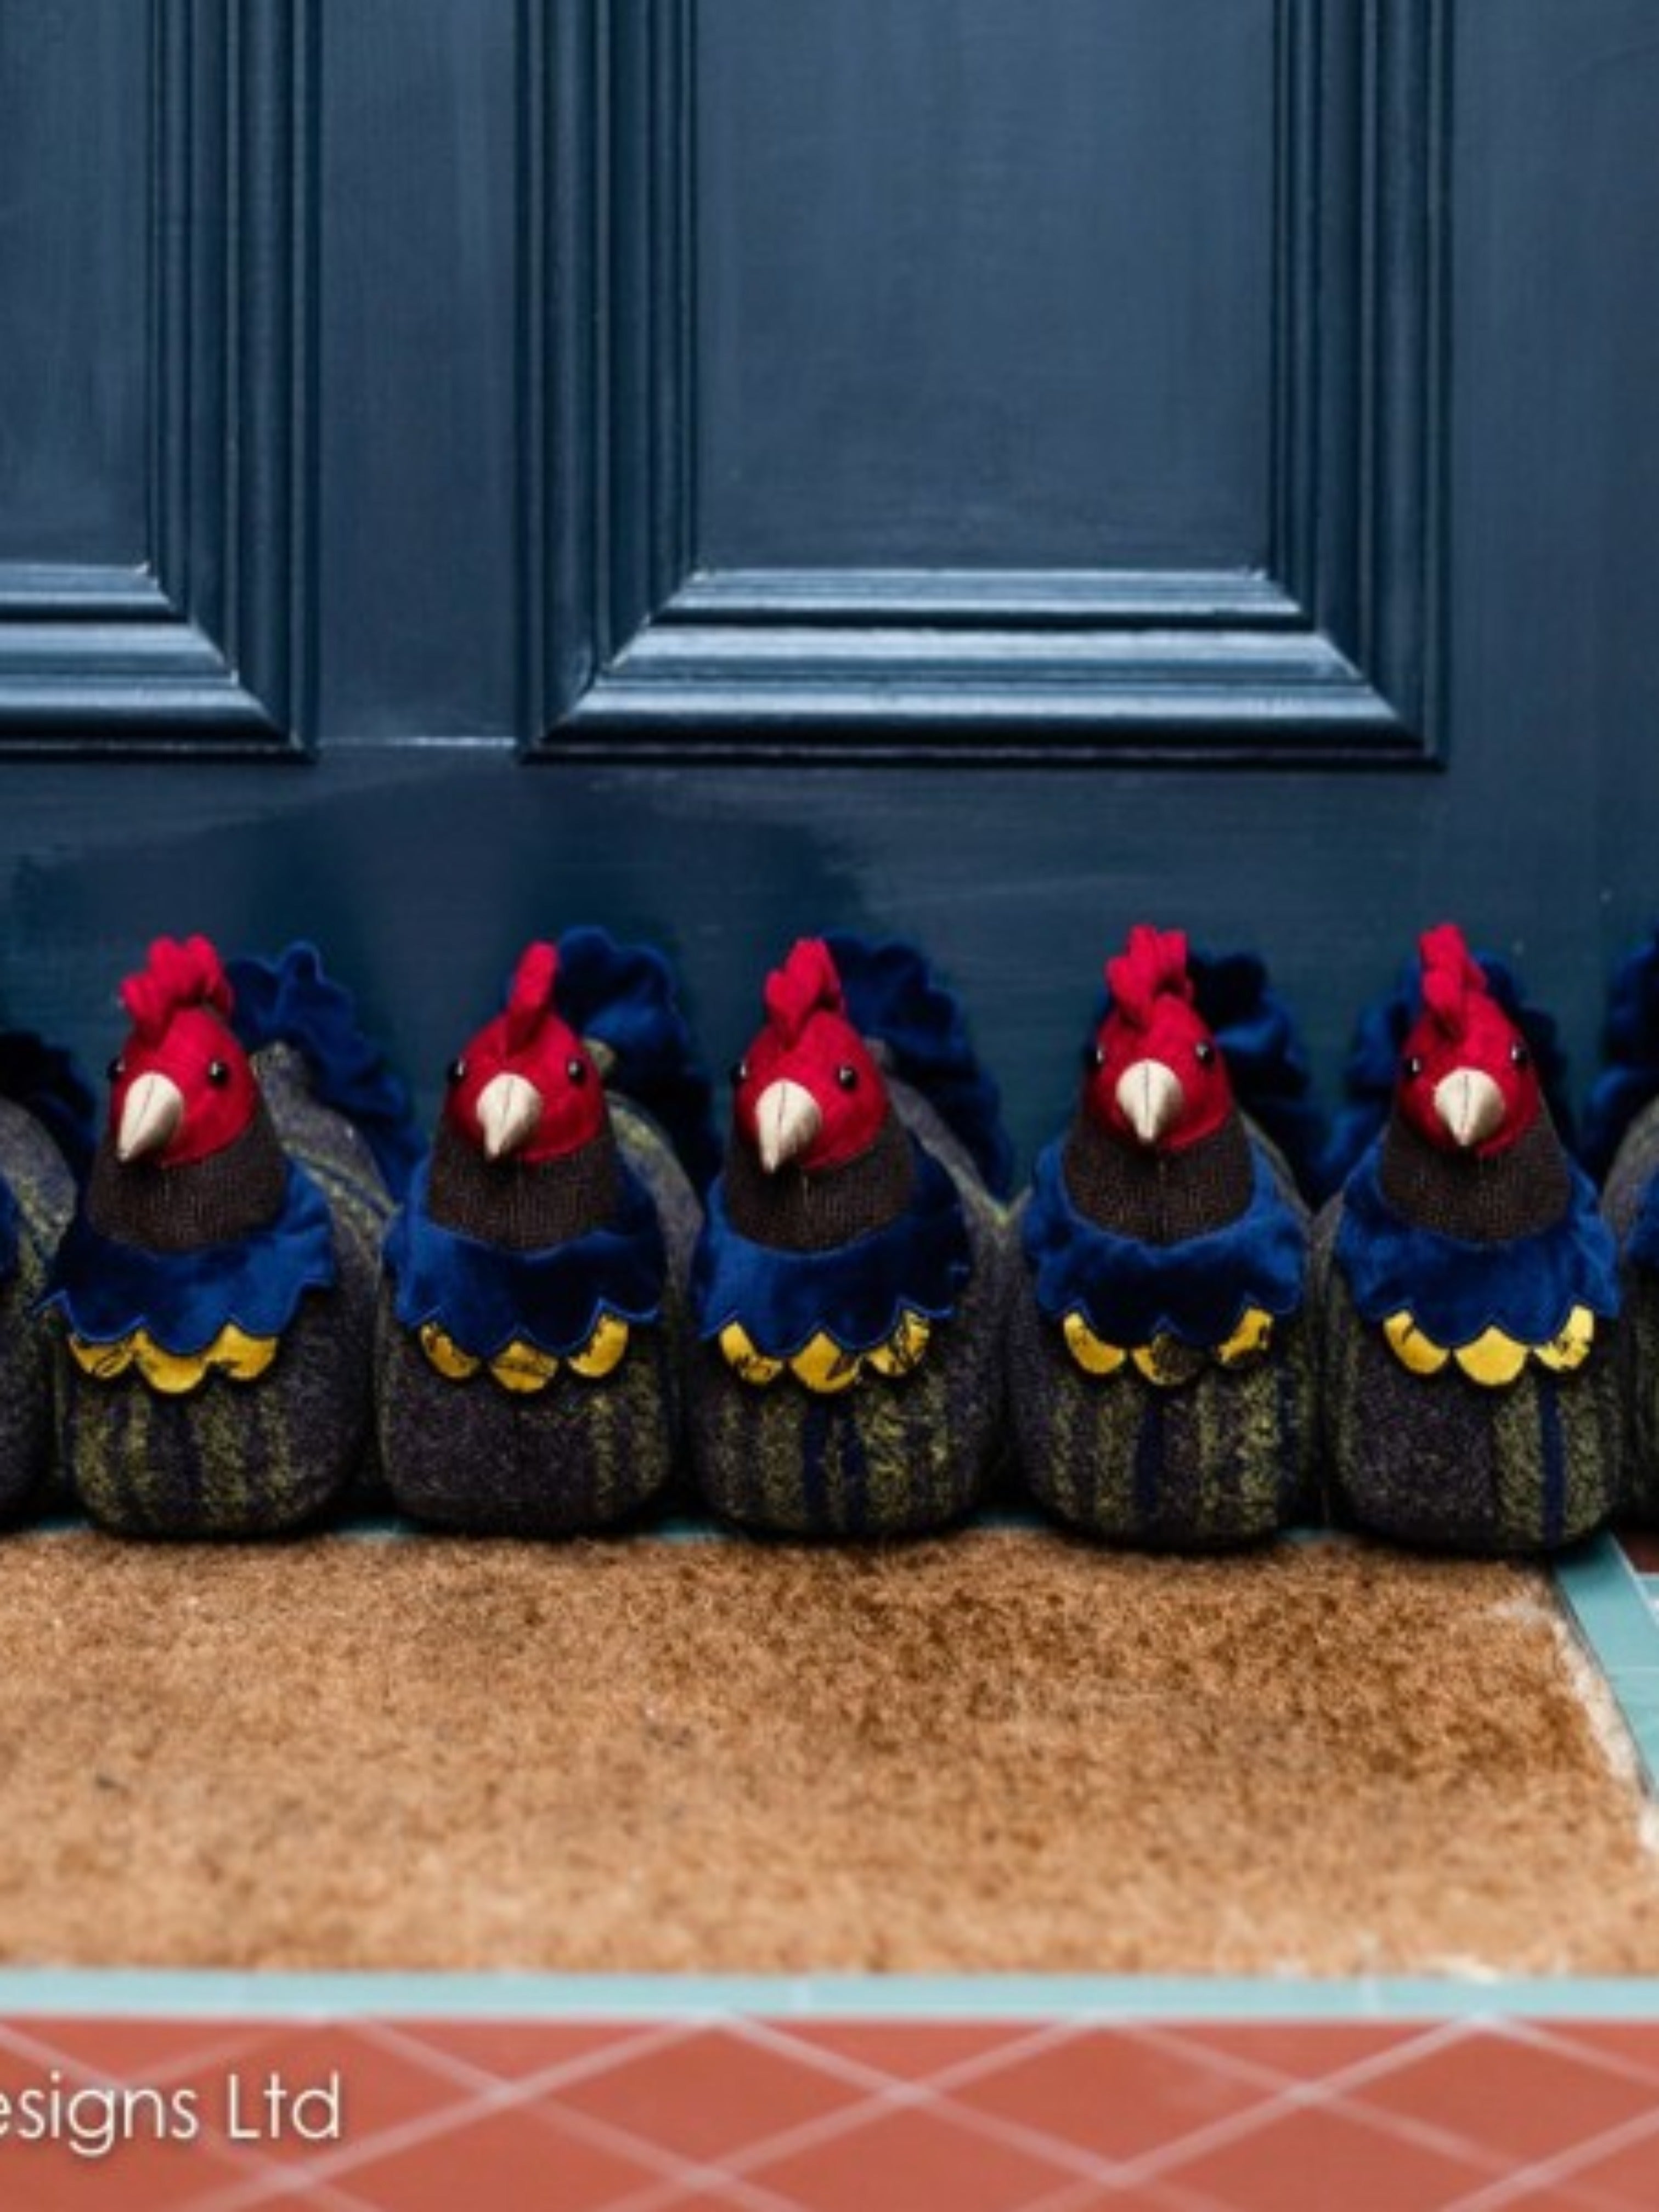 The Brood Brooding Hens Draught Excluder